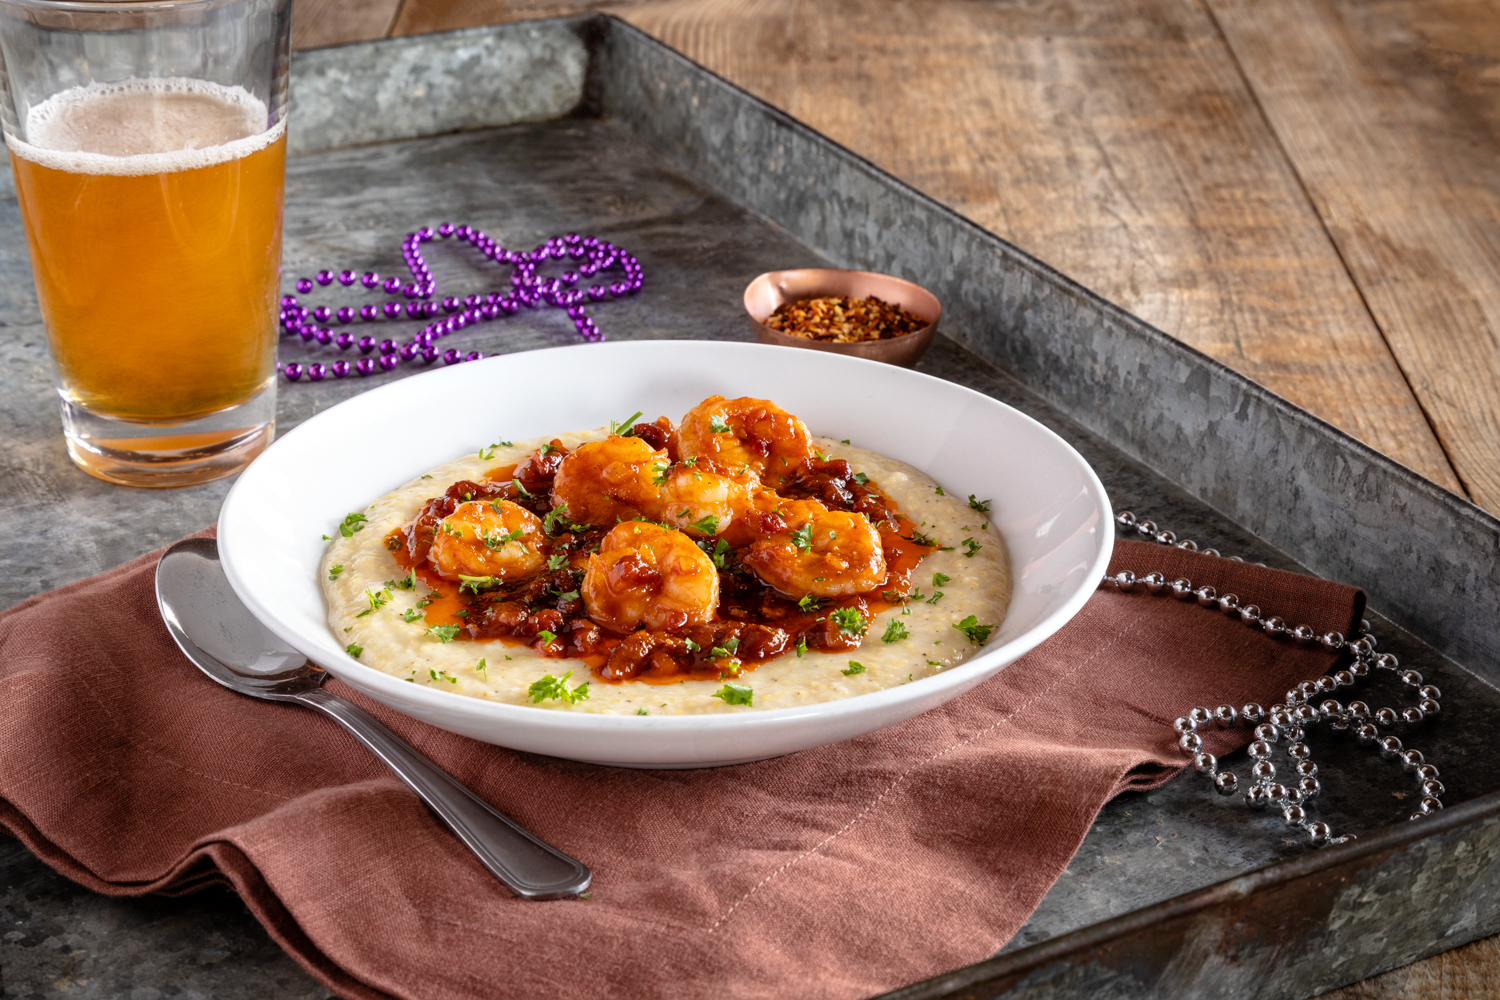 CHEESY GRITS AND SHRIMP APPETIZER